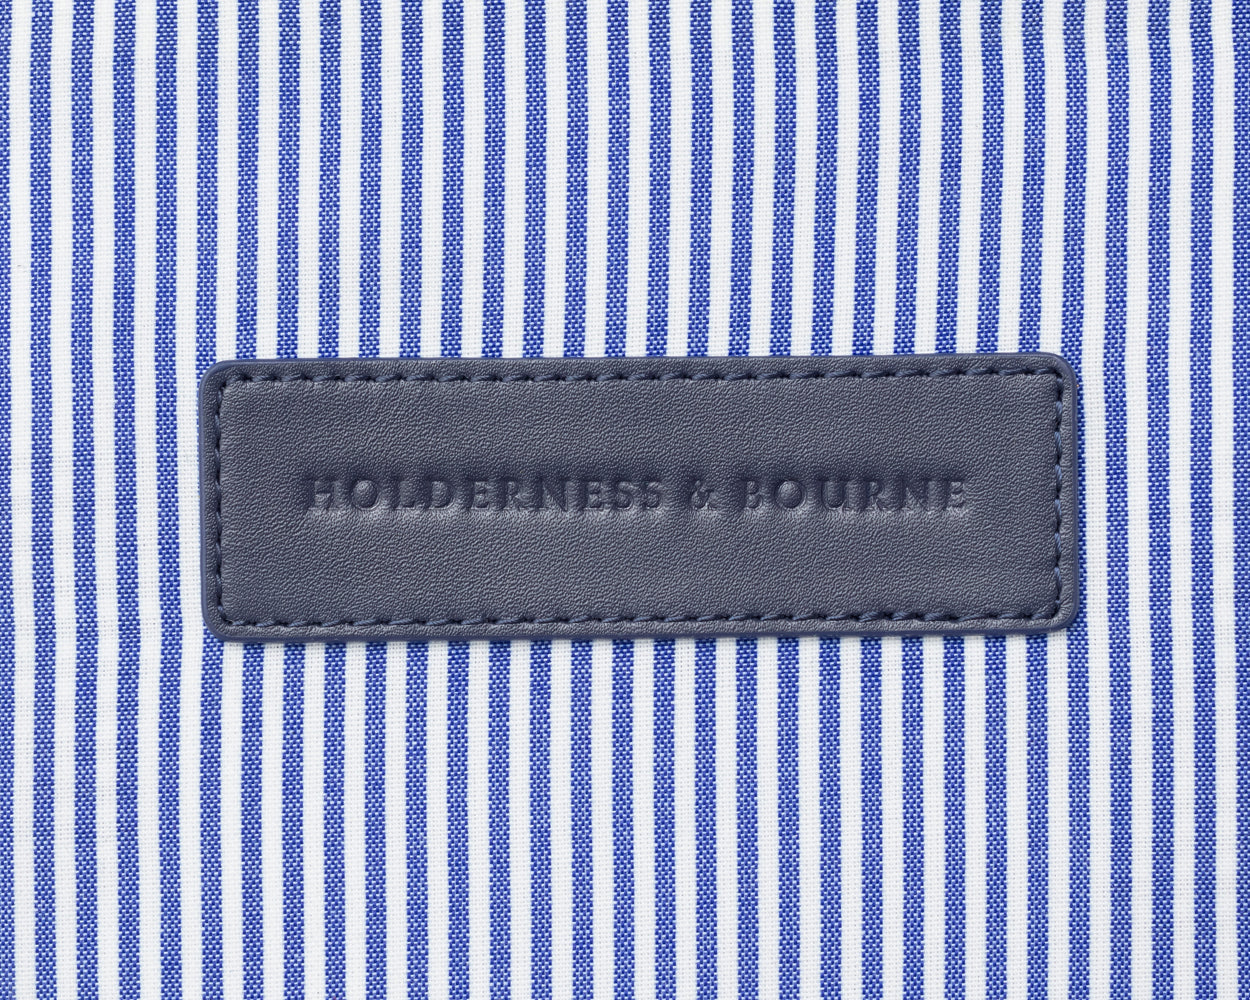 Close up on Holderness and Bourne navy lettering against striped blue and white fabric background.